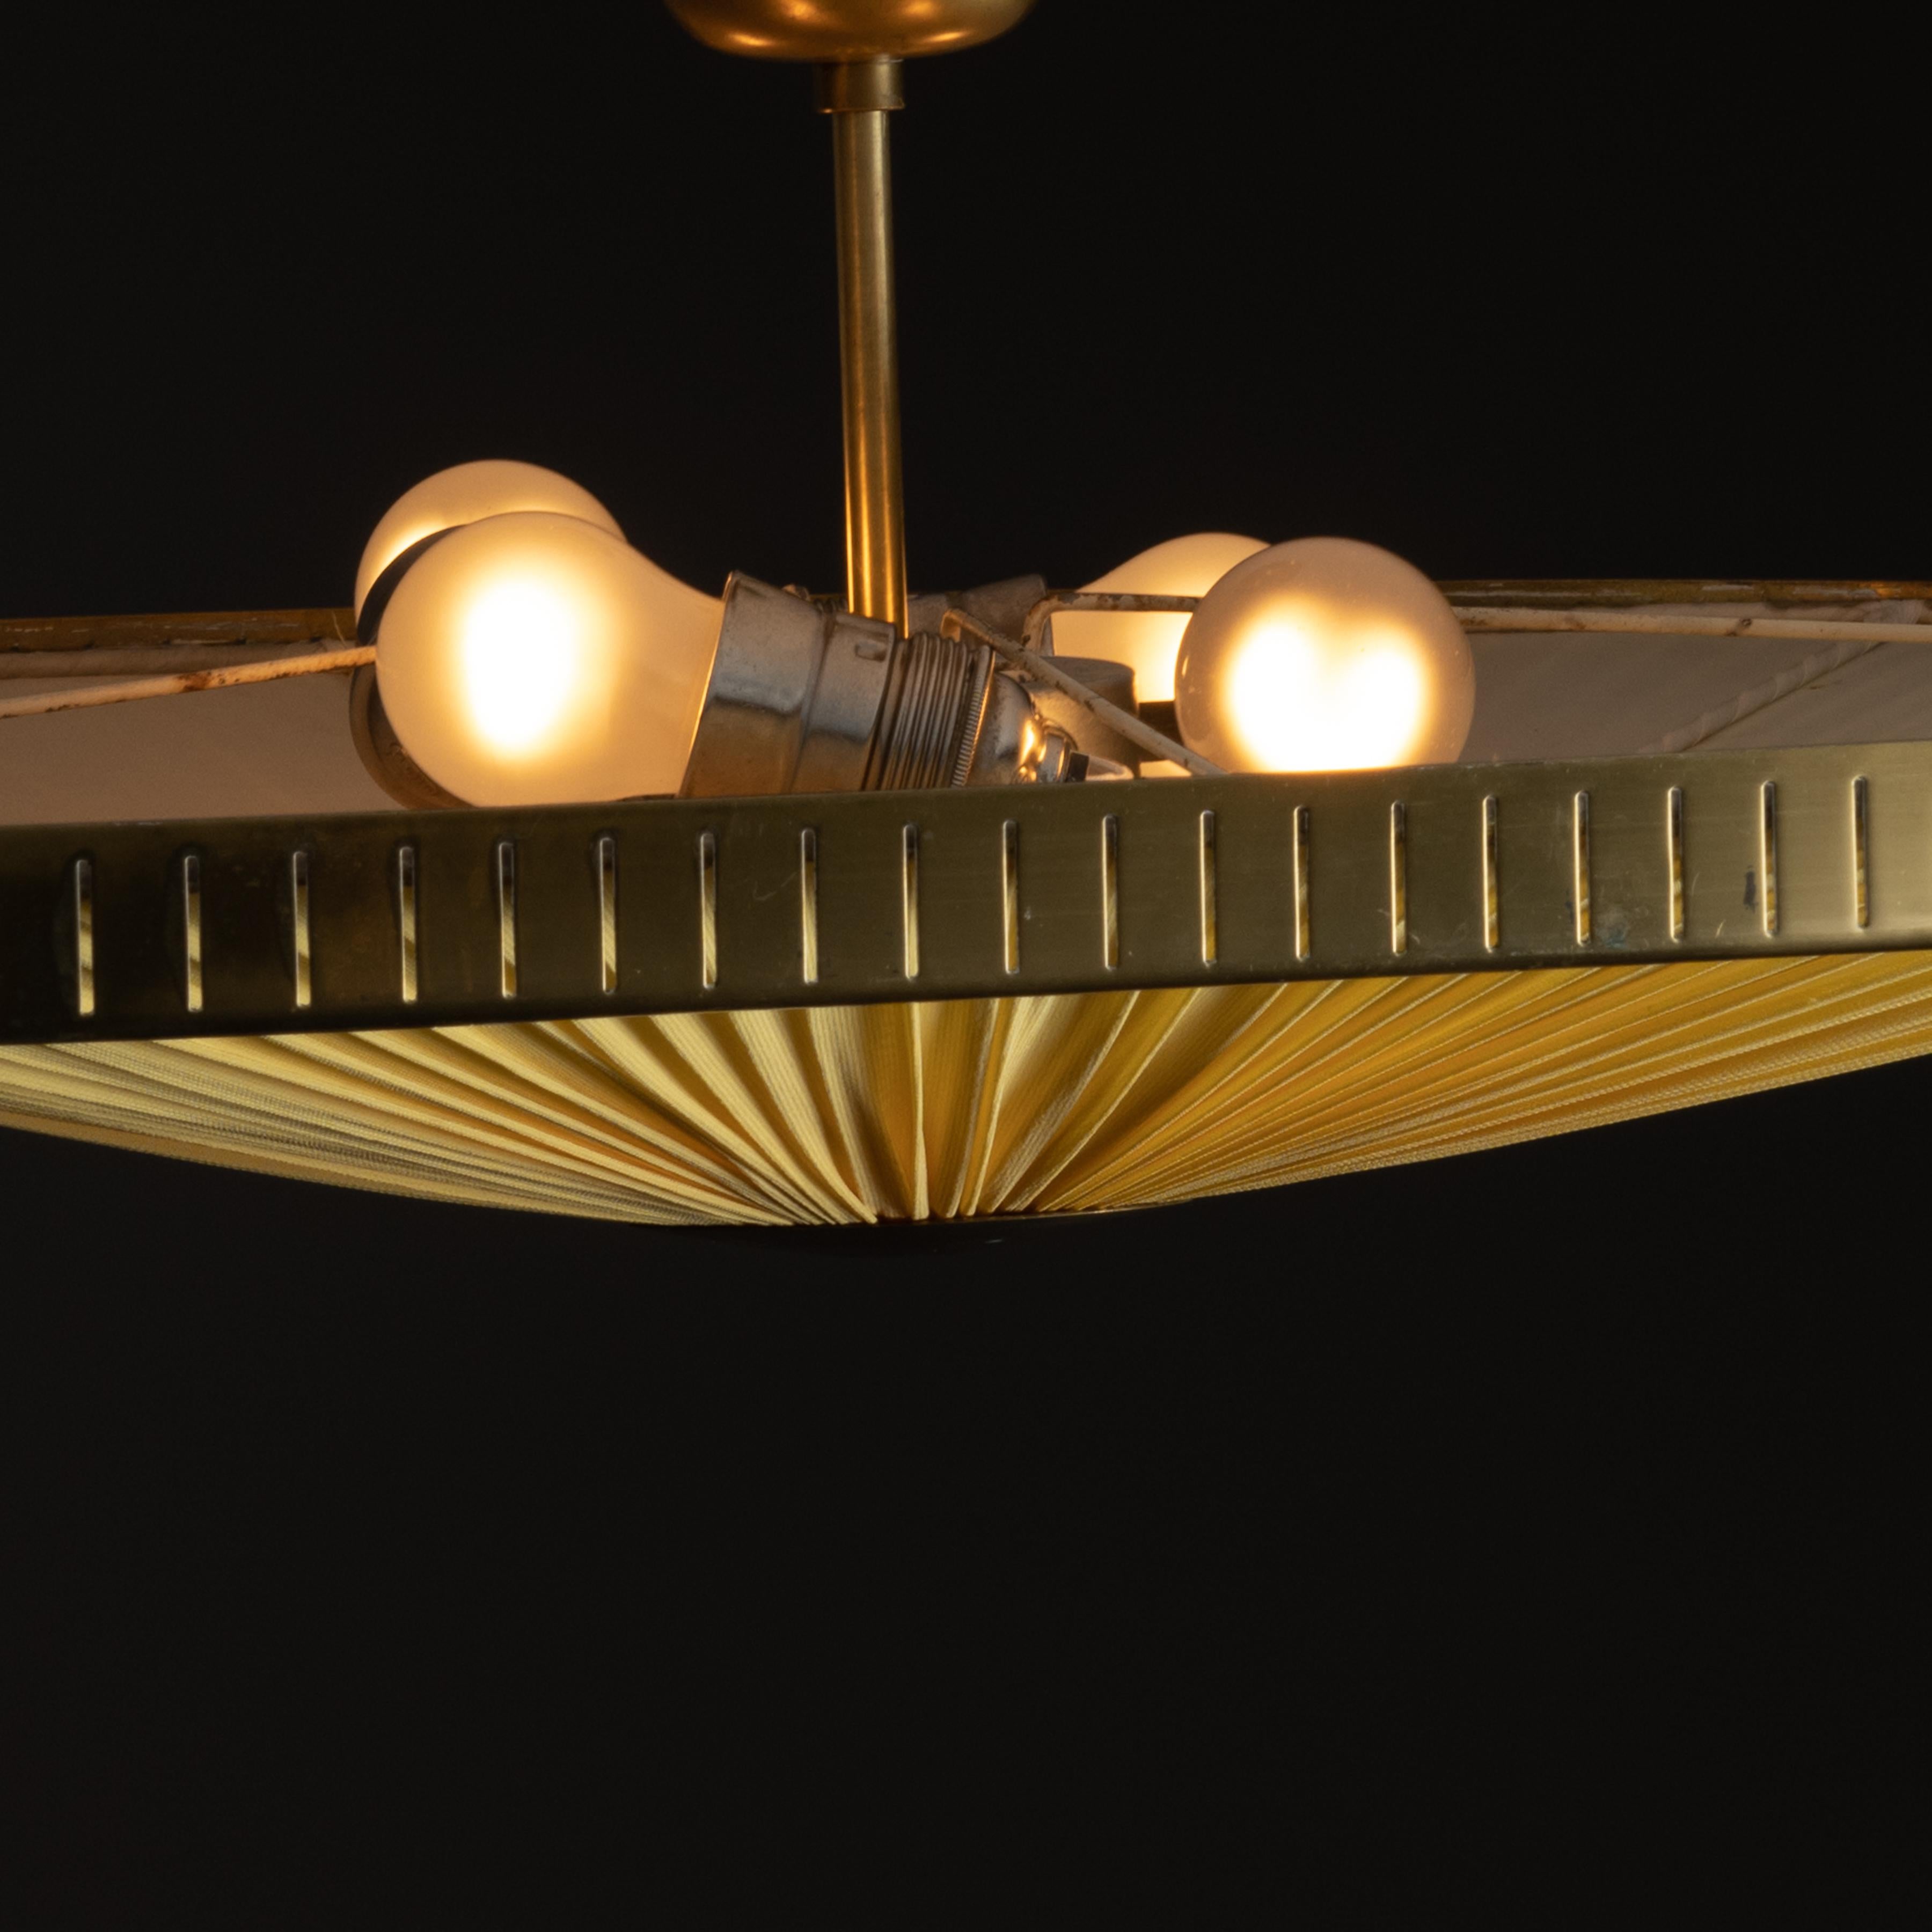 Polished Model 11858 Ceiling Flush Mount by Harald Notini for Arvid Böhlmarks Lampfabrik